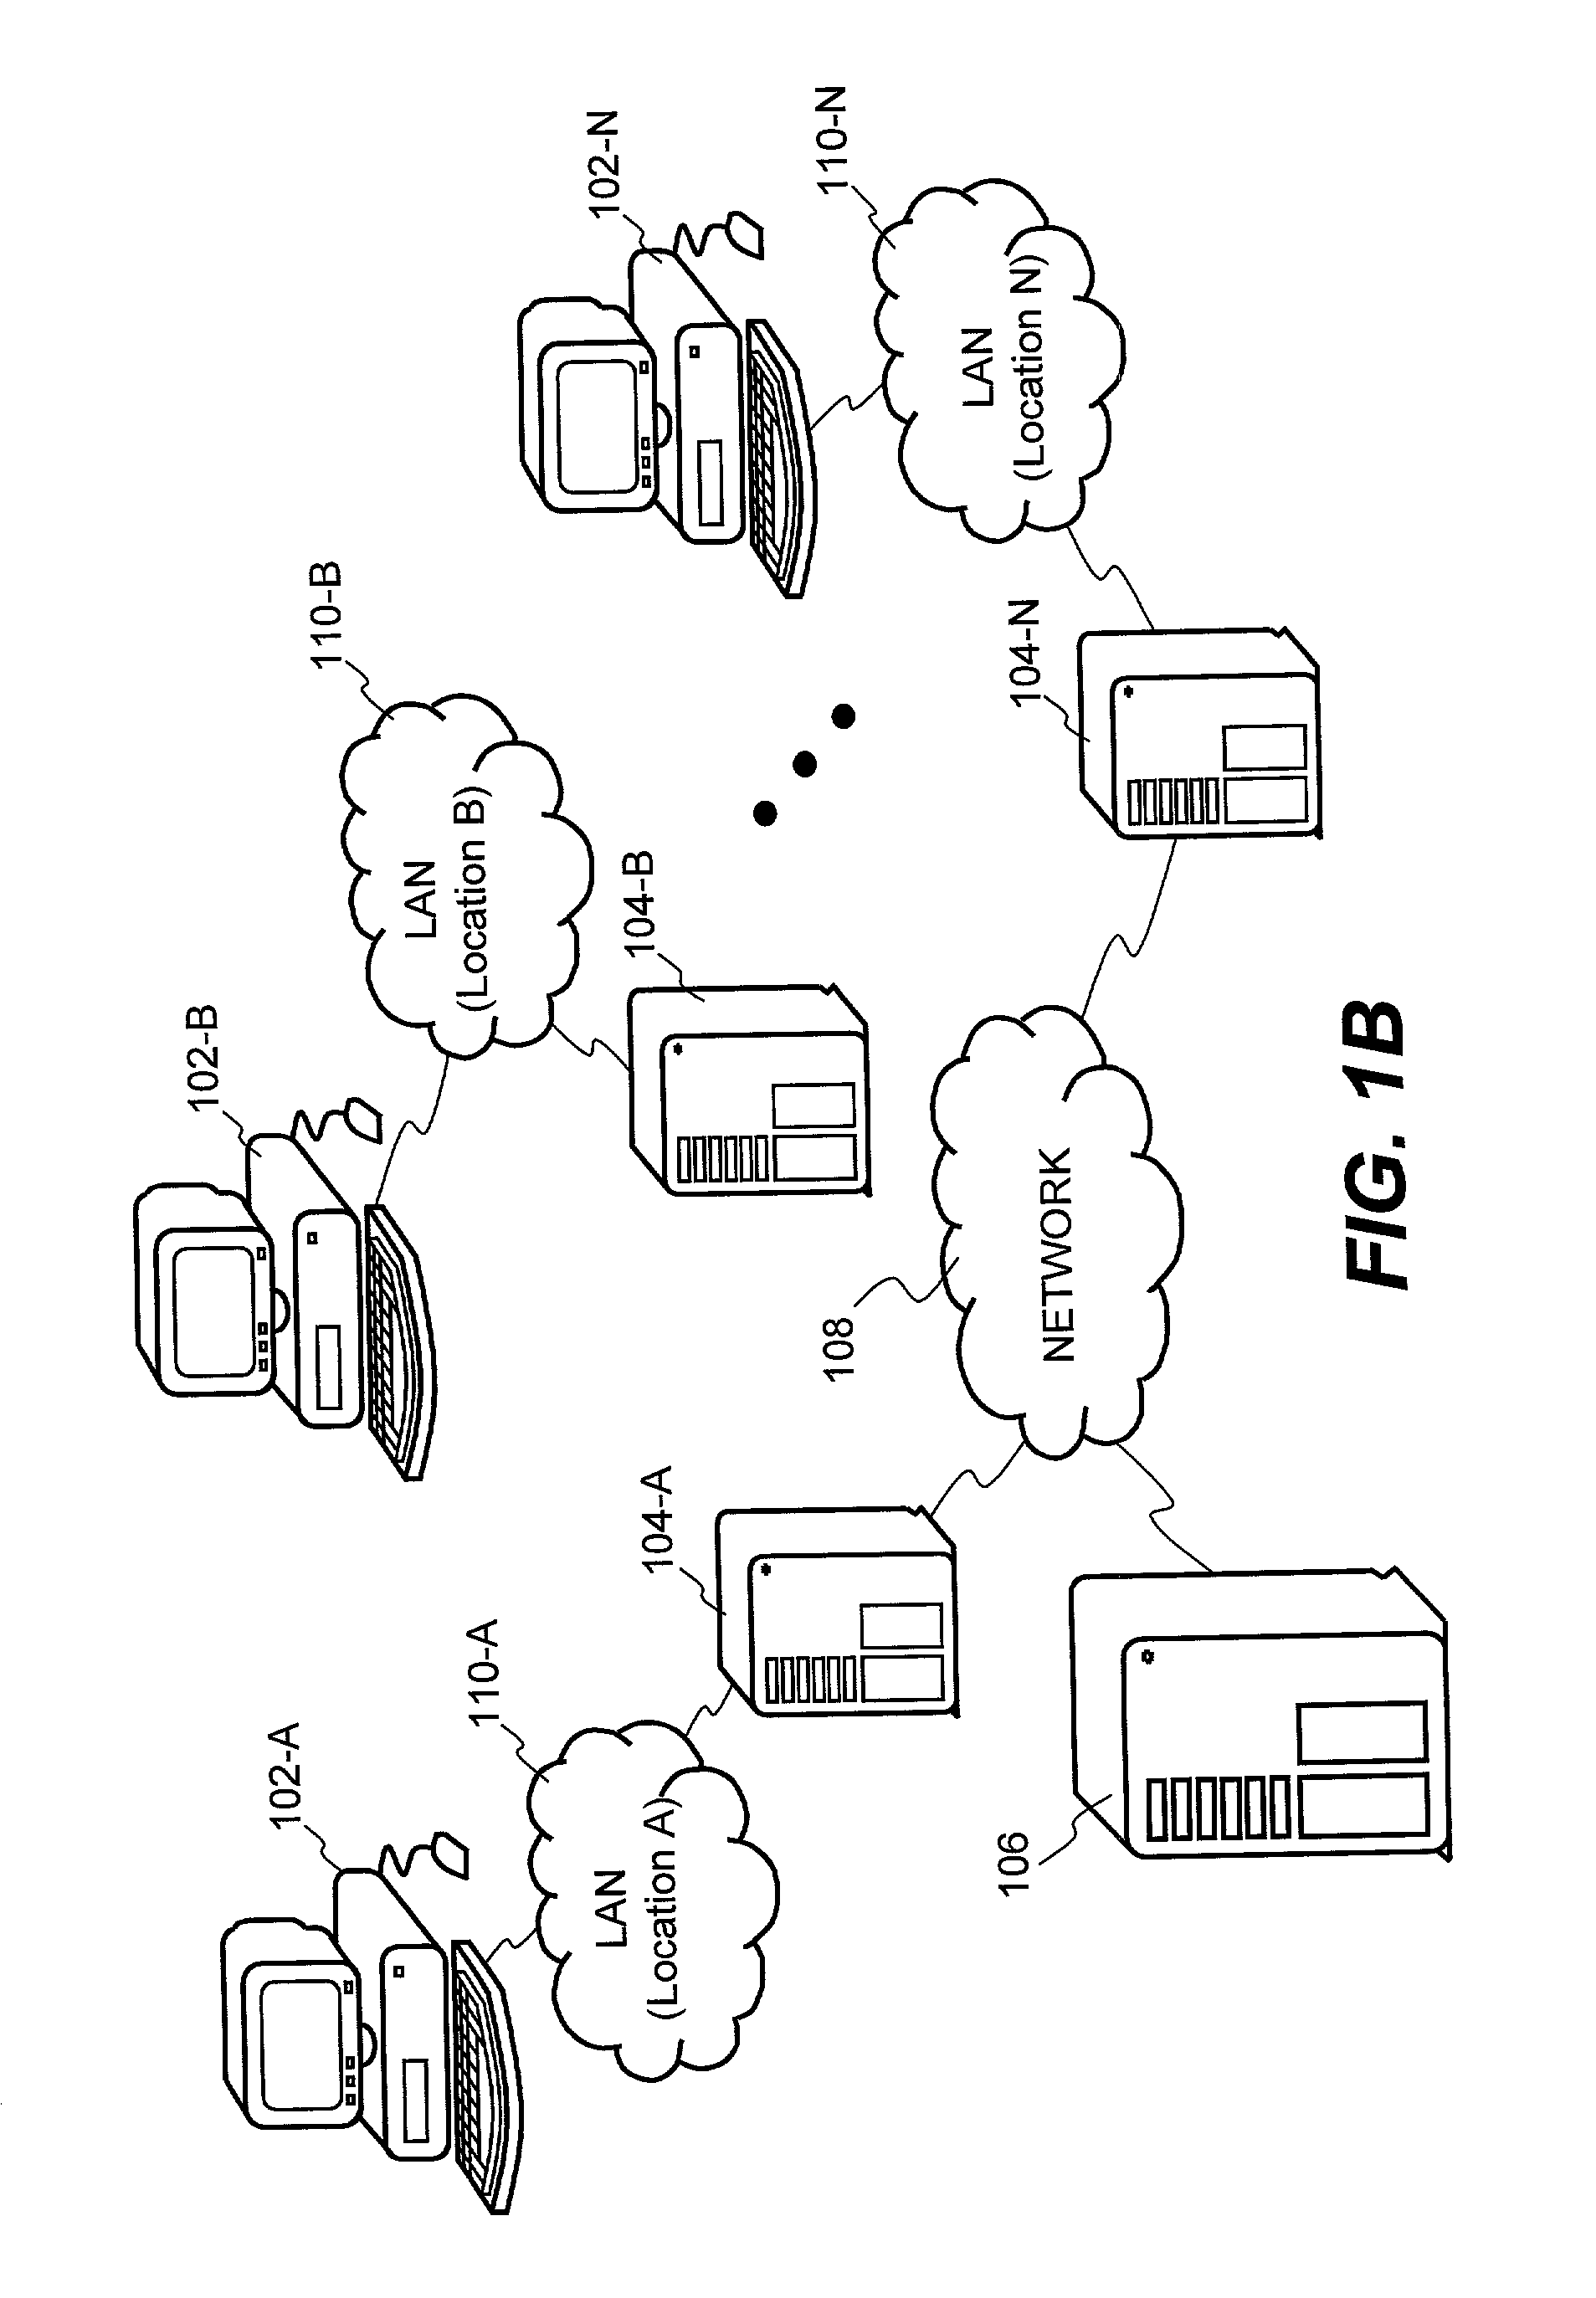 System and method for providing multi-location access management to secured items